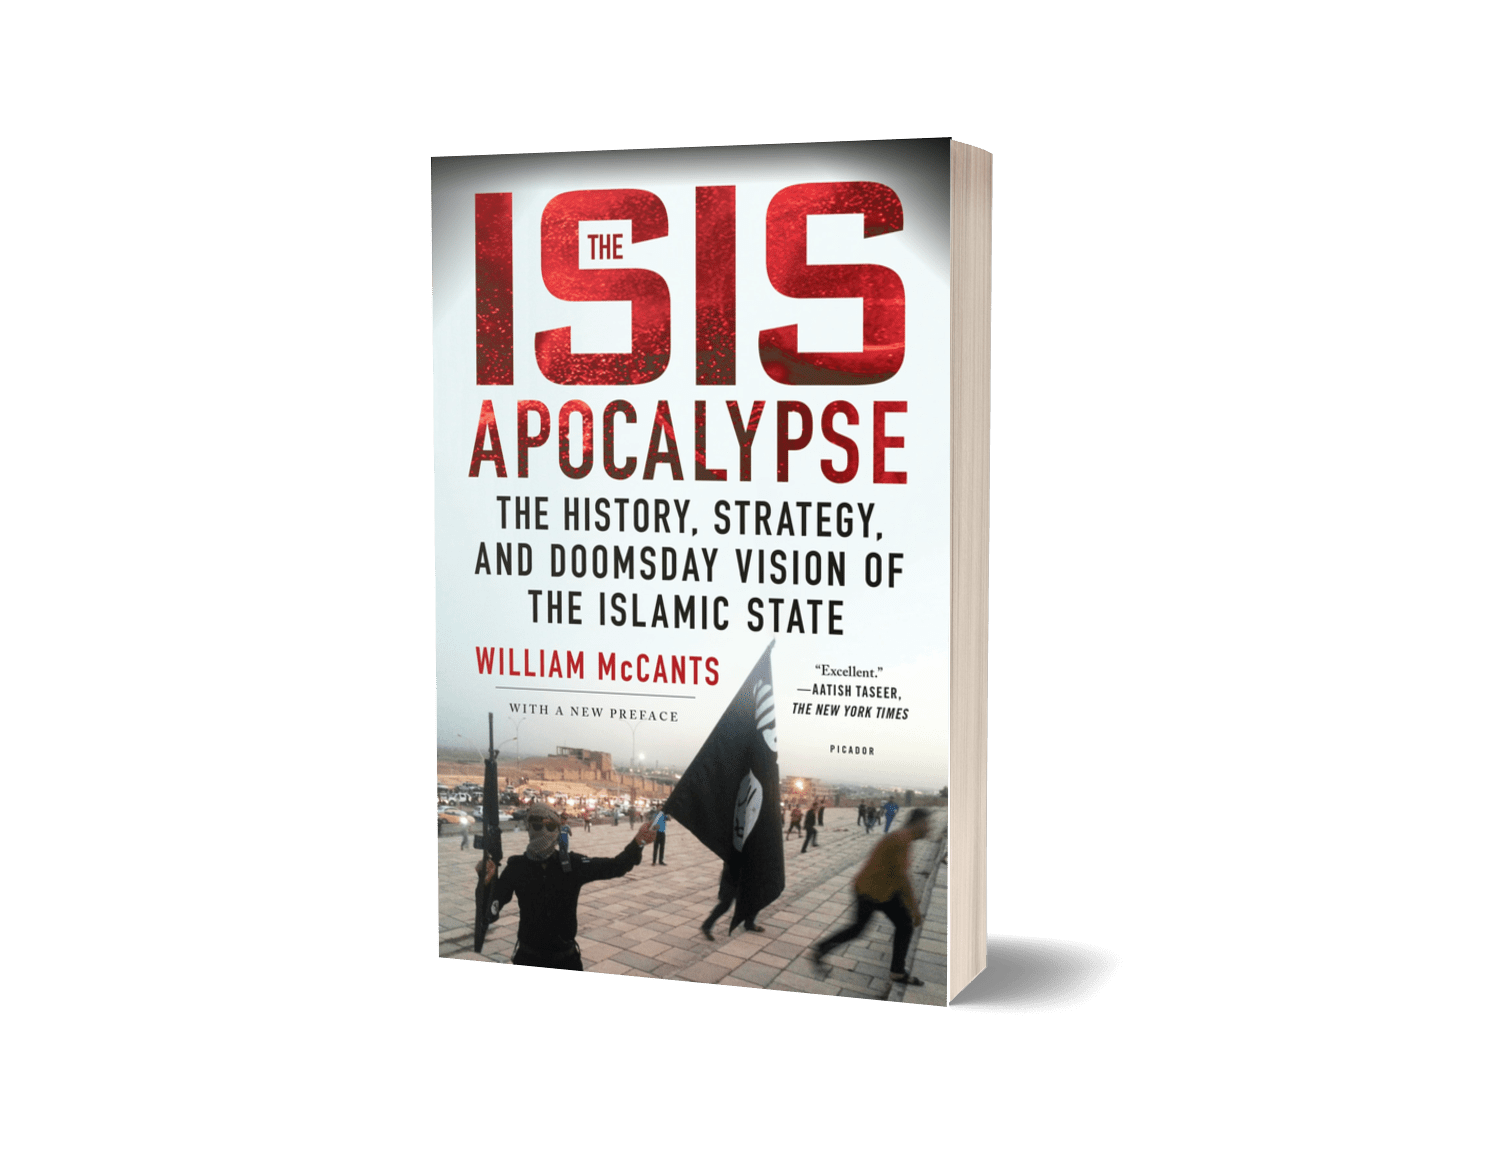 The ISIS Apocalypse by WIlliam McCants